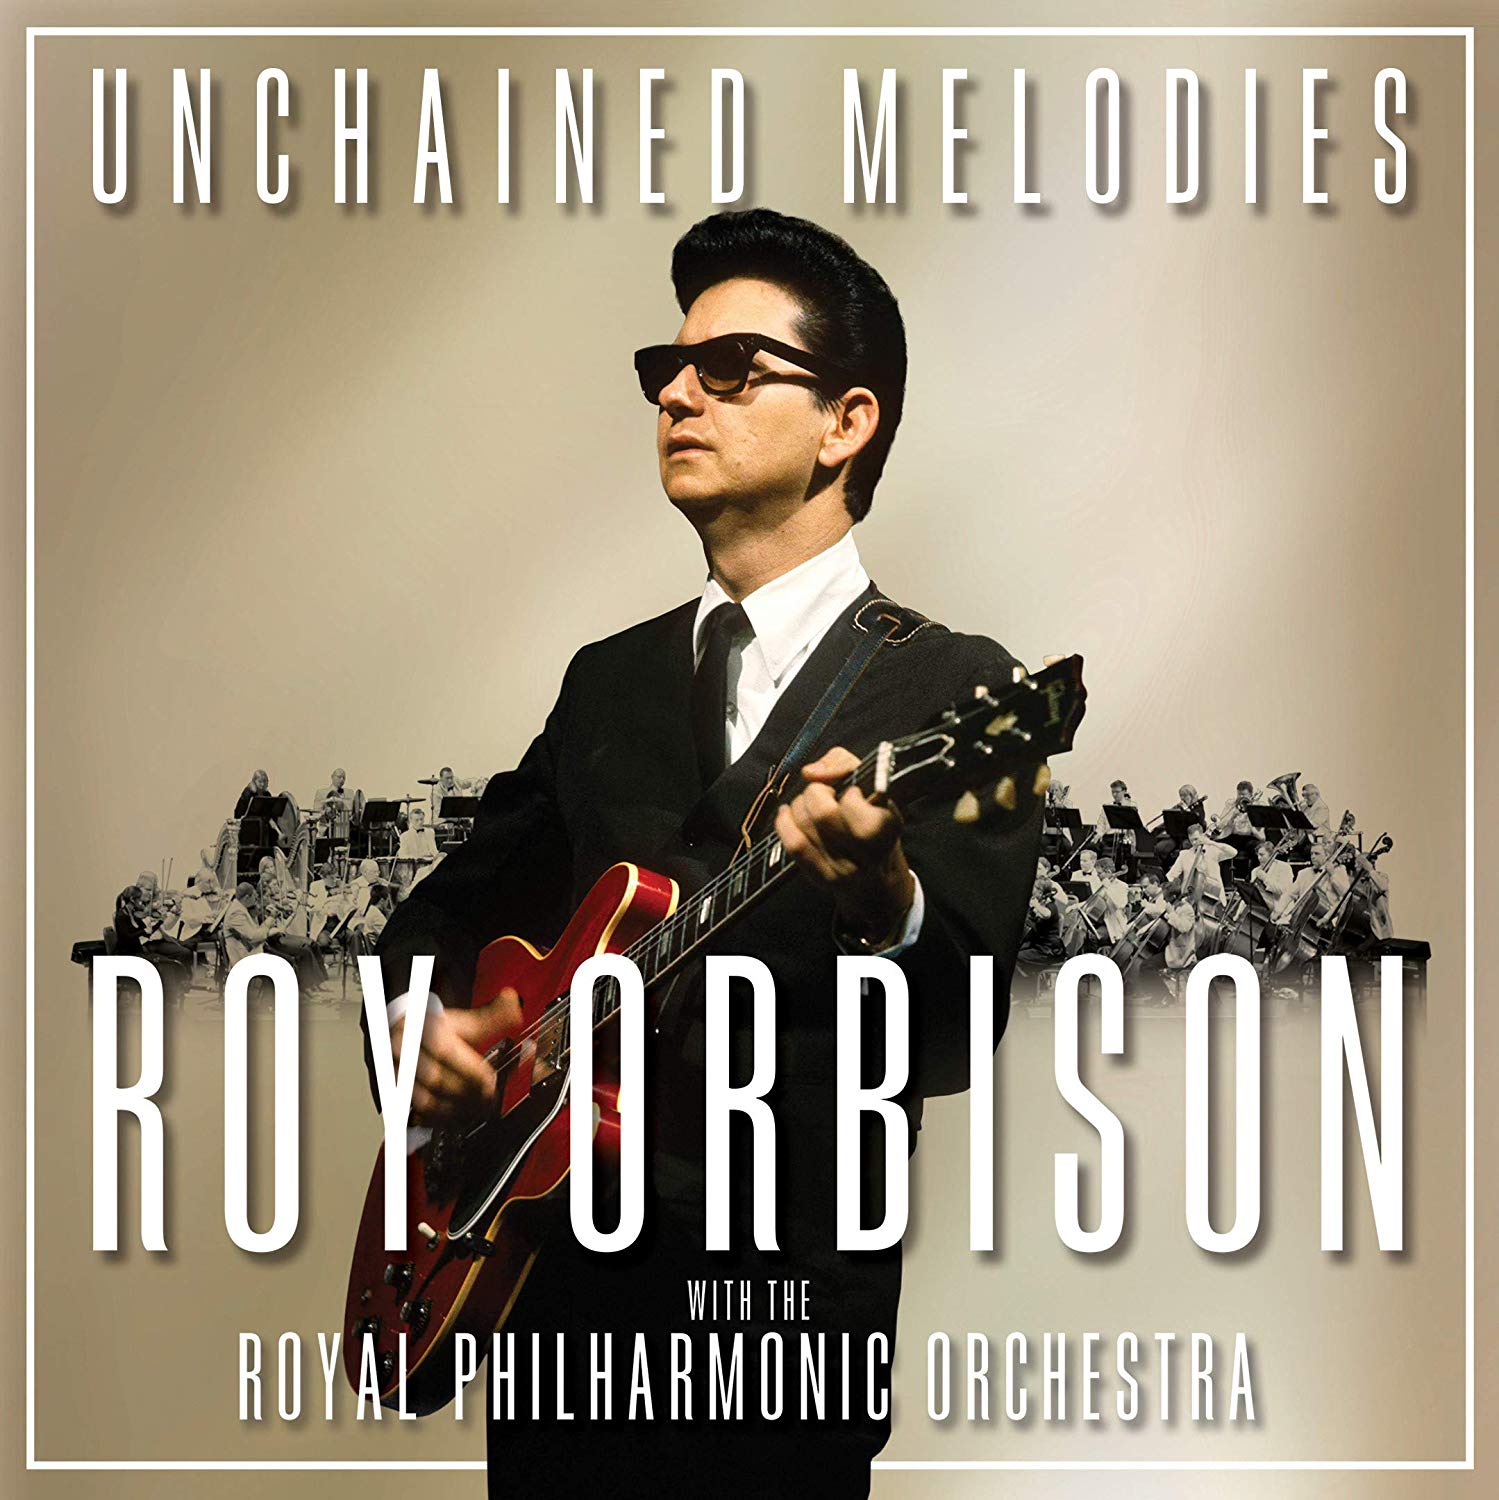 Unchained Melodies With The Royal Philharmonic Orchestra - Vinyl | Roy Orbison